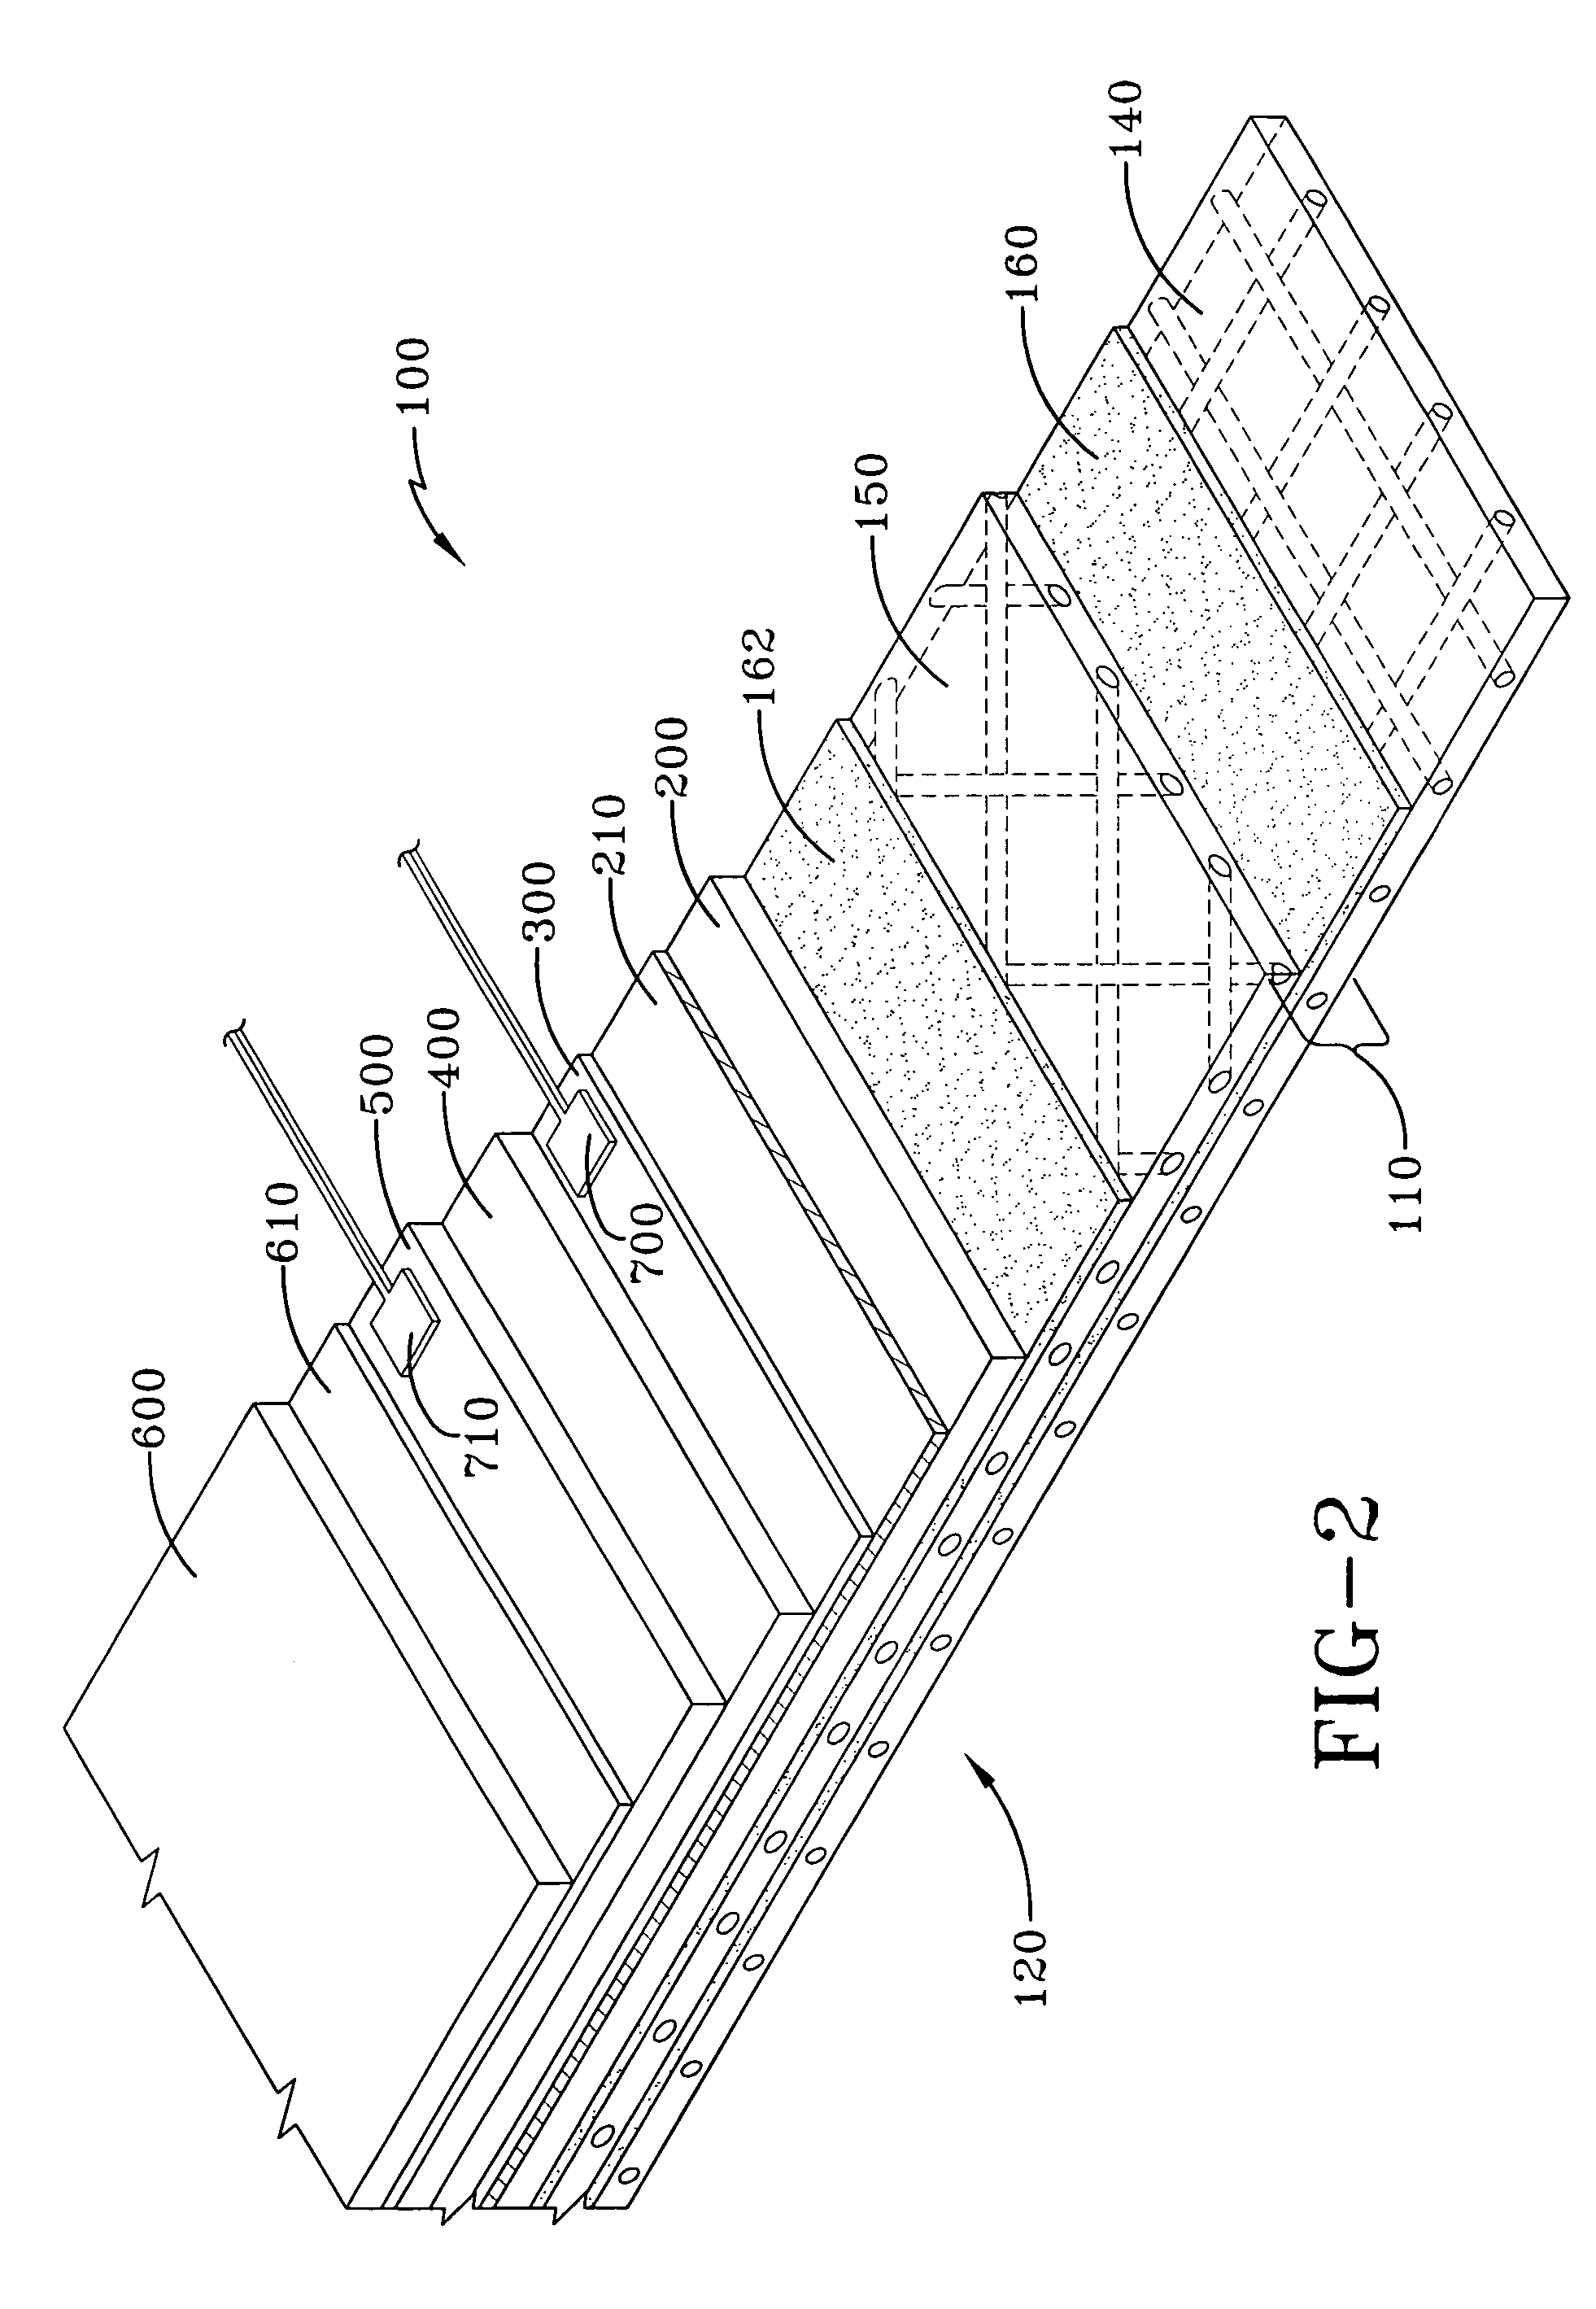 Piezoelectric and pyroelectric power-generating laminate for an airship envelope